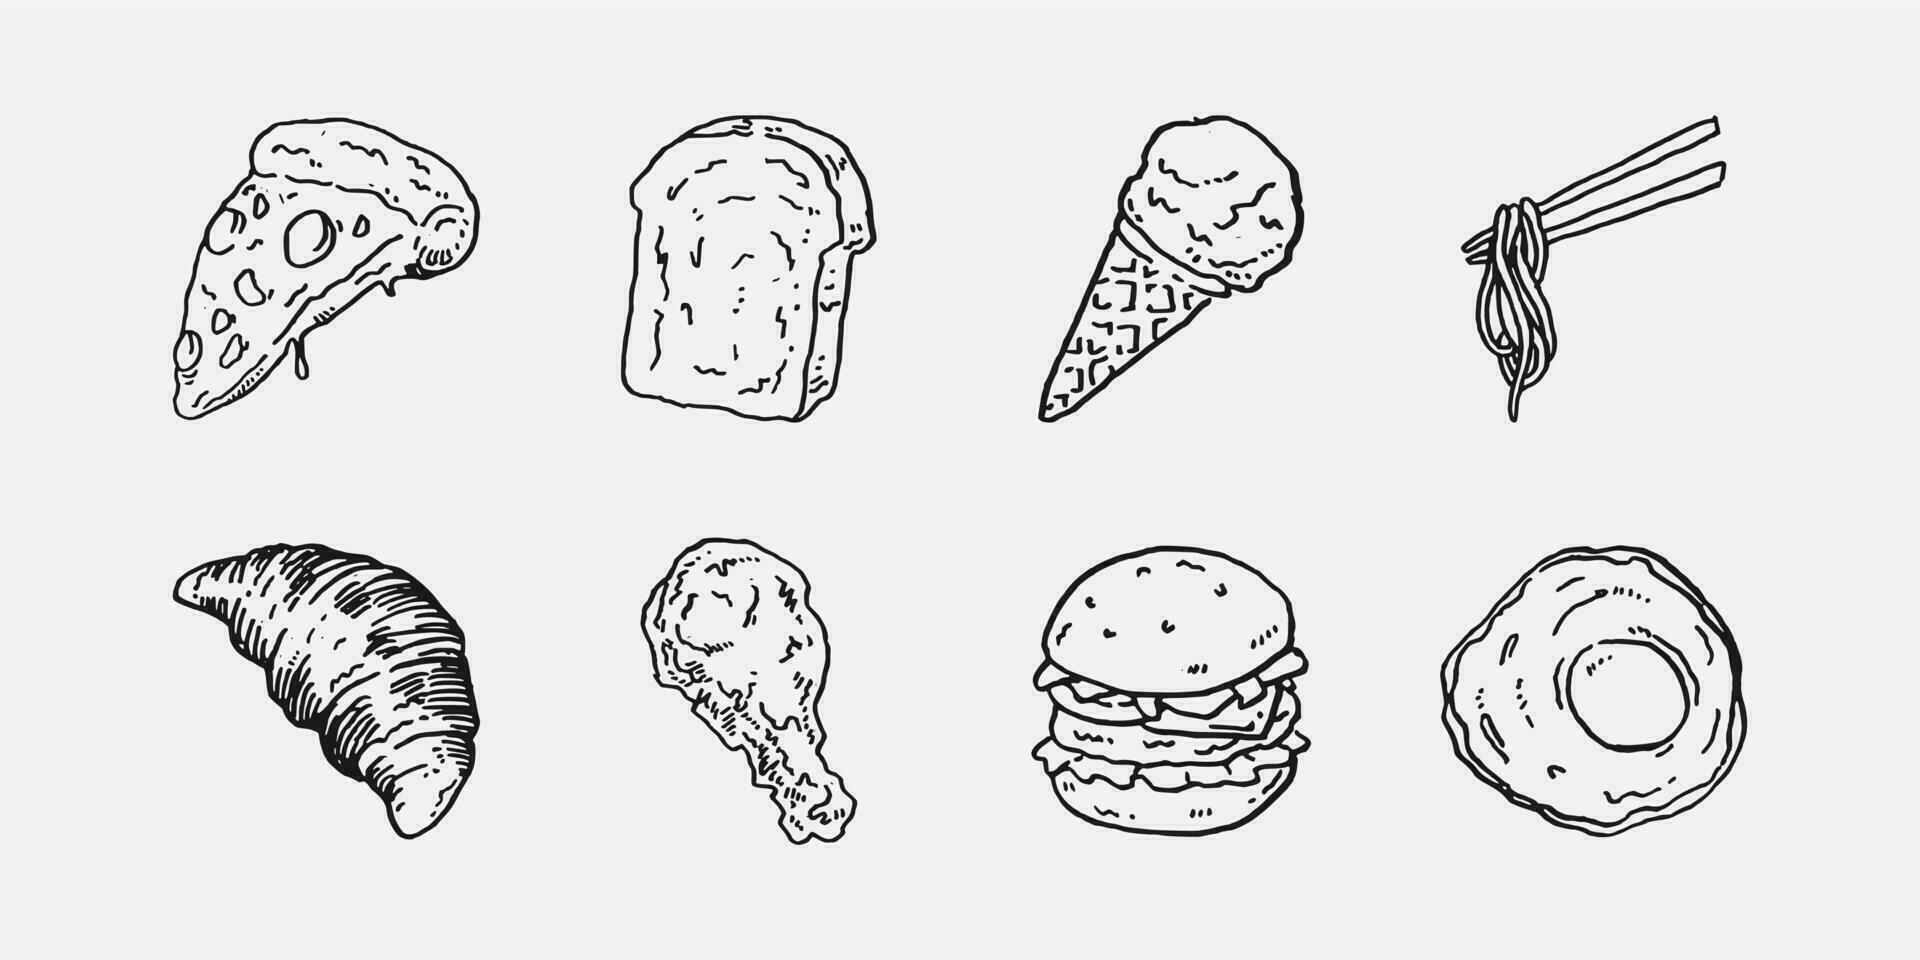 set bundle of various foods, including pizza, bread, ice cream, noodle, fried egg, fried chicken, burger and croissant in a hand-drawn style. vector illustration.